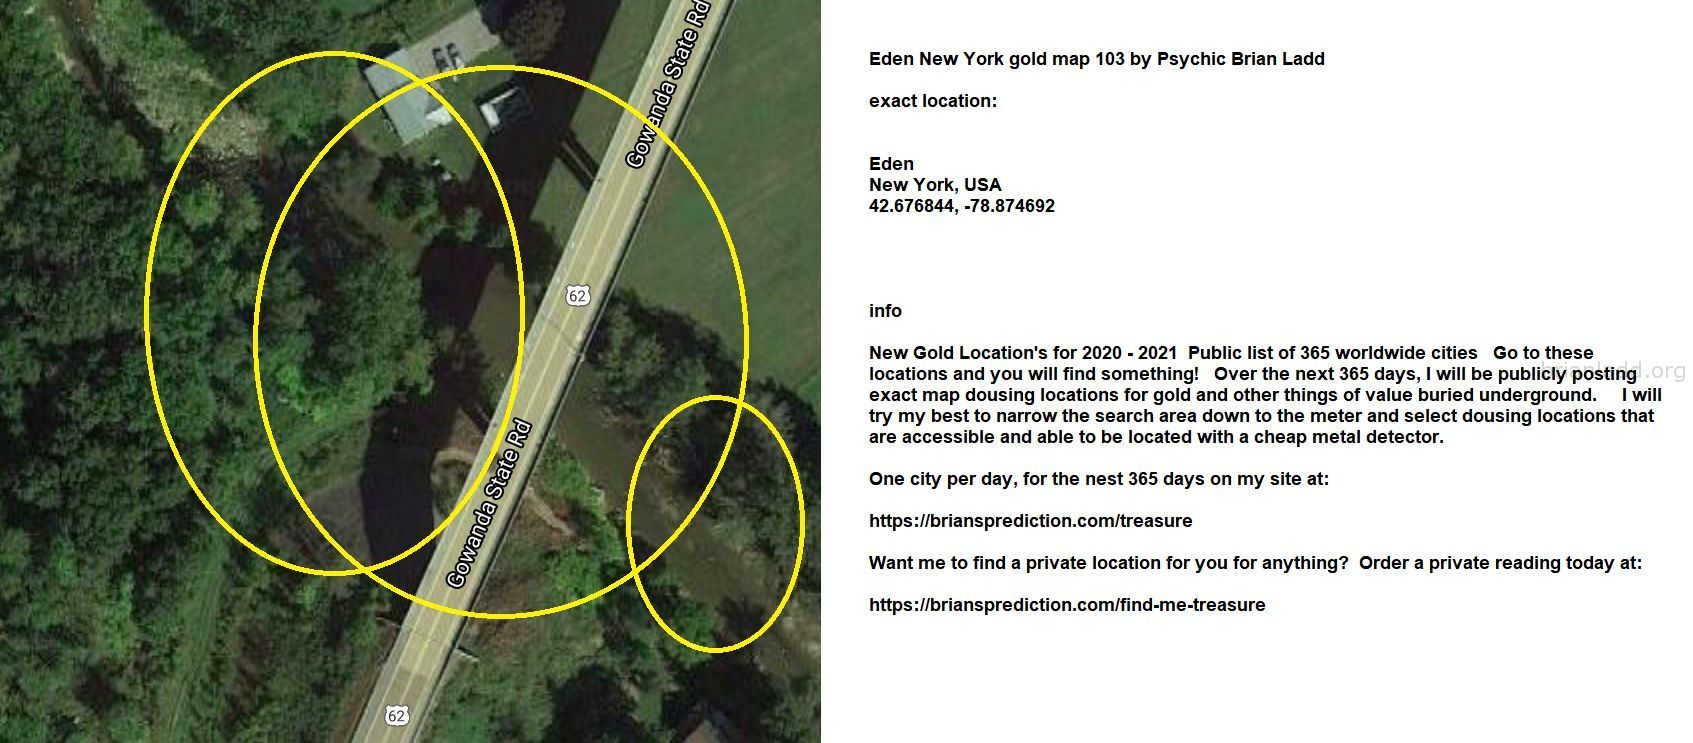 Eden New York gold map 104 by Psychic Brian Ladd
New Gold Location's for 2020 - 2021  Public list of 365 worldwide cities   Go to these locations and you will find something!   Over the next 365 days, I will be publicly posting exact map dousing locations for gold and other things of value buried underground.     I will try my best to narrow the search area down to the meter and select dousing locations that are accessible and able to be located with a cheap metal detector. One city per day, for the nest 365 days on my site at:  https://briansprediction.com/treasure  Want me to find a private location for you for anything?  Order a private reading today at:  https://briansprediction.com/find-me-treasure
